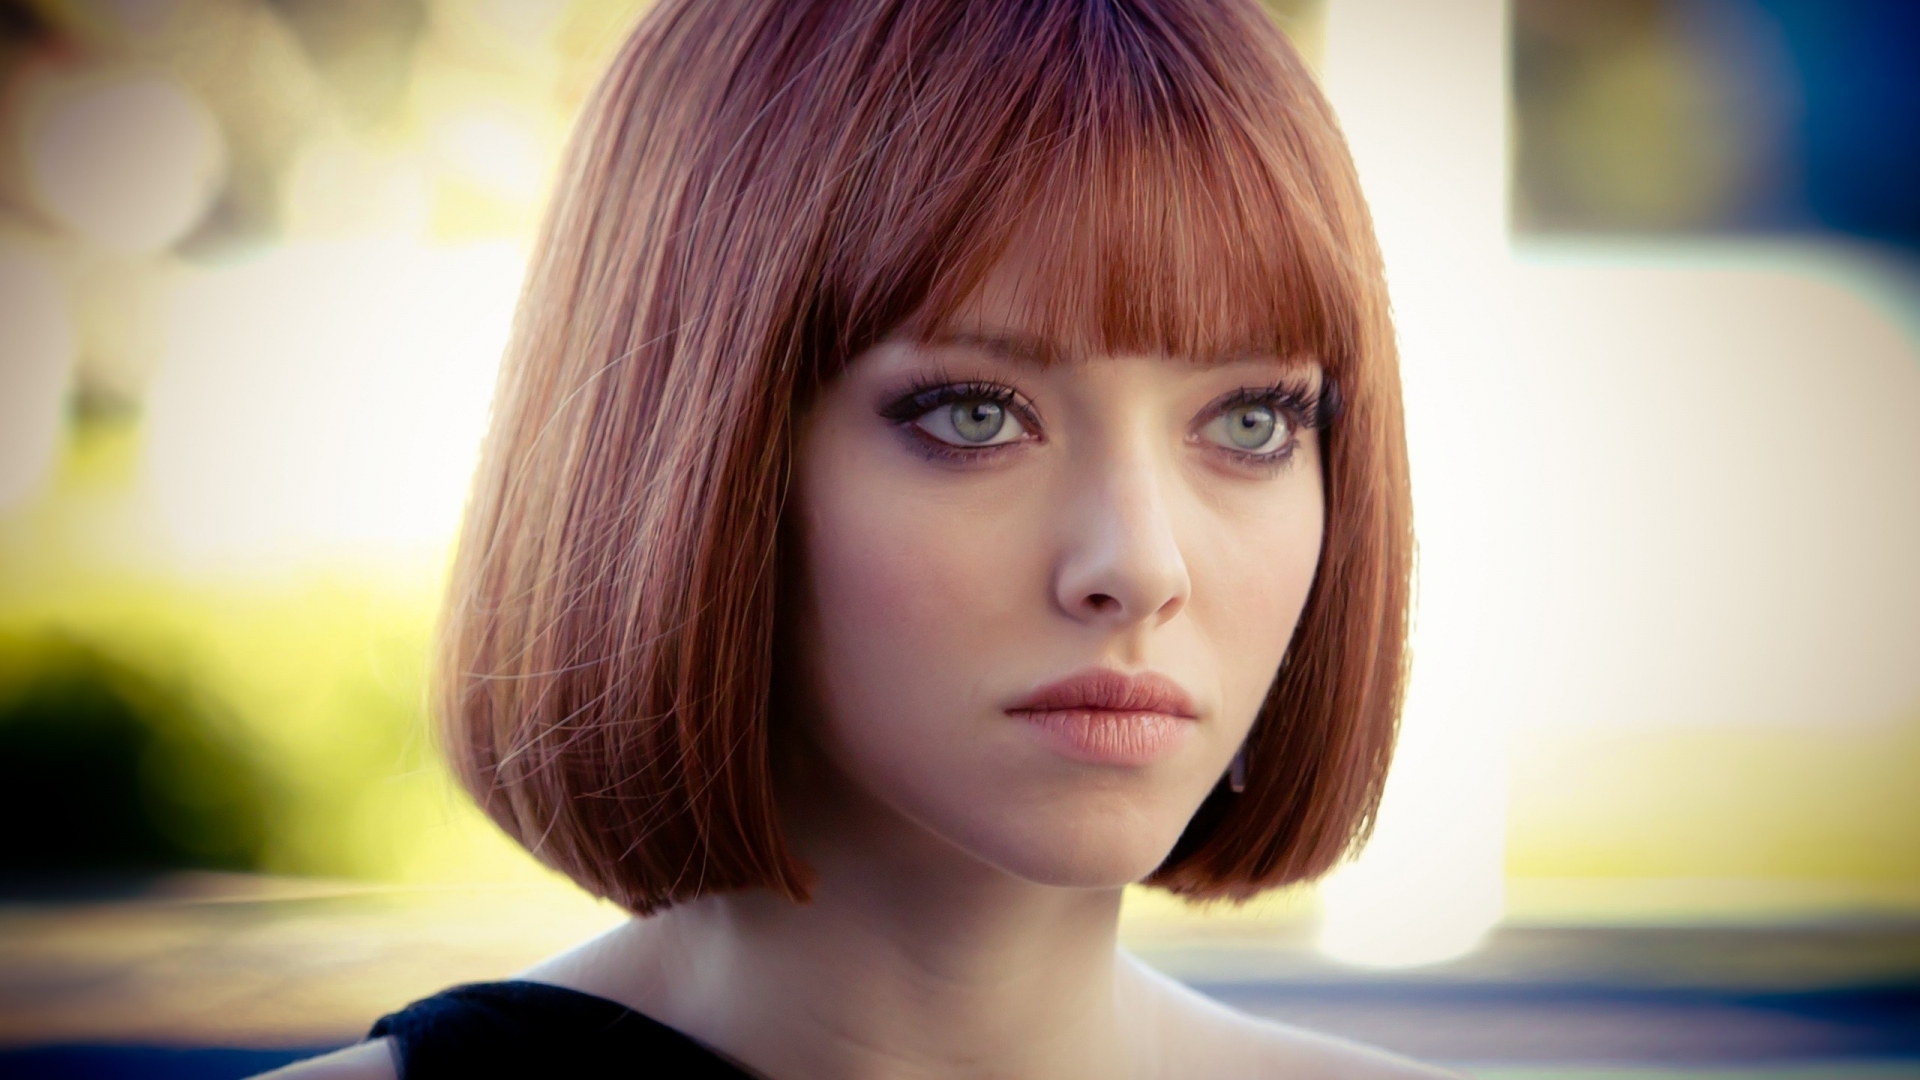 Amanda Seyfried In Time for 1920 x 1080 HDTV 1080p resolution